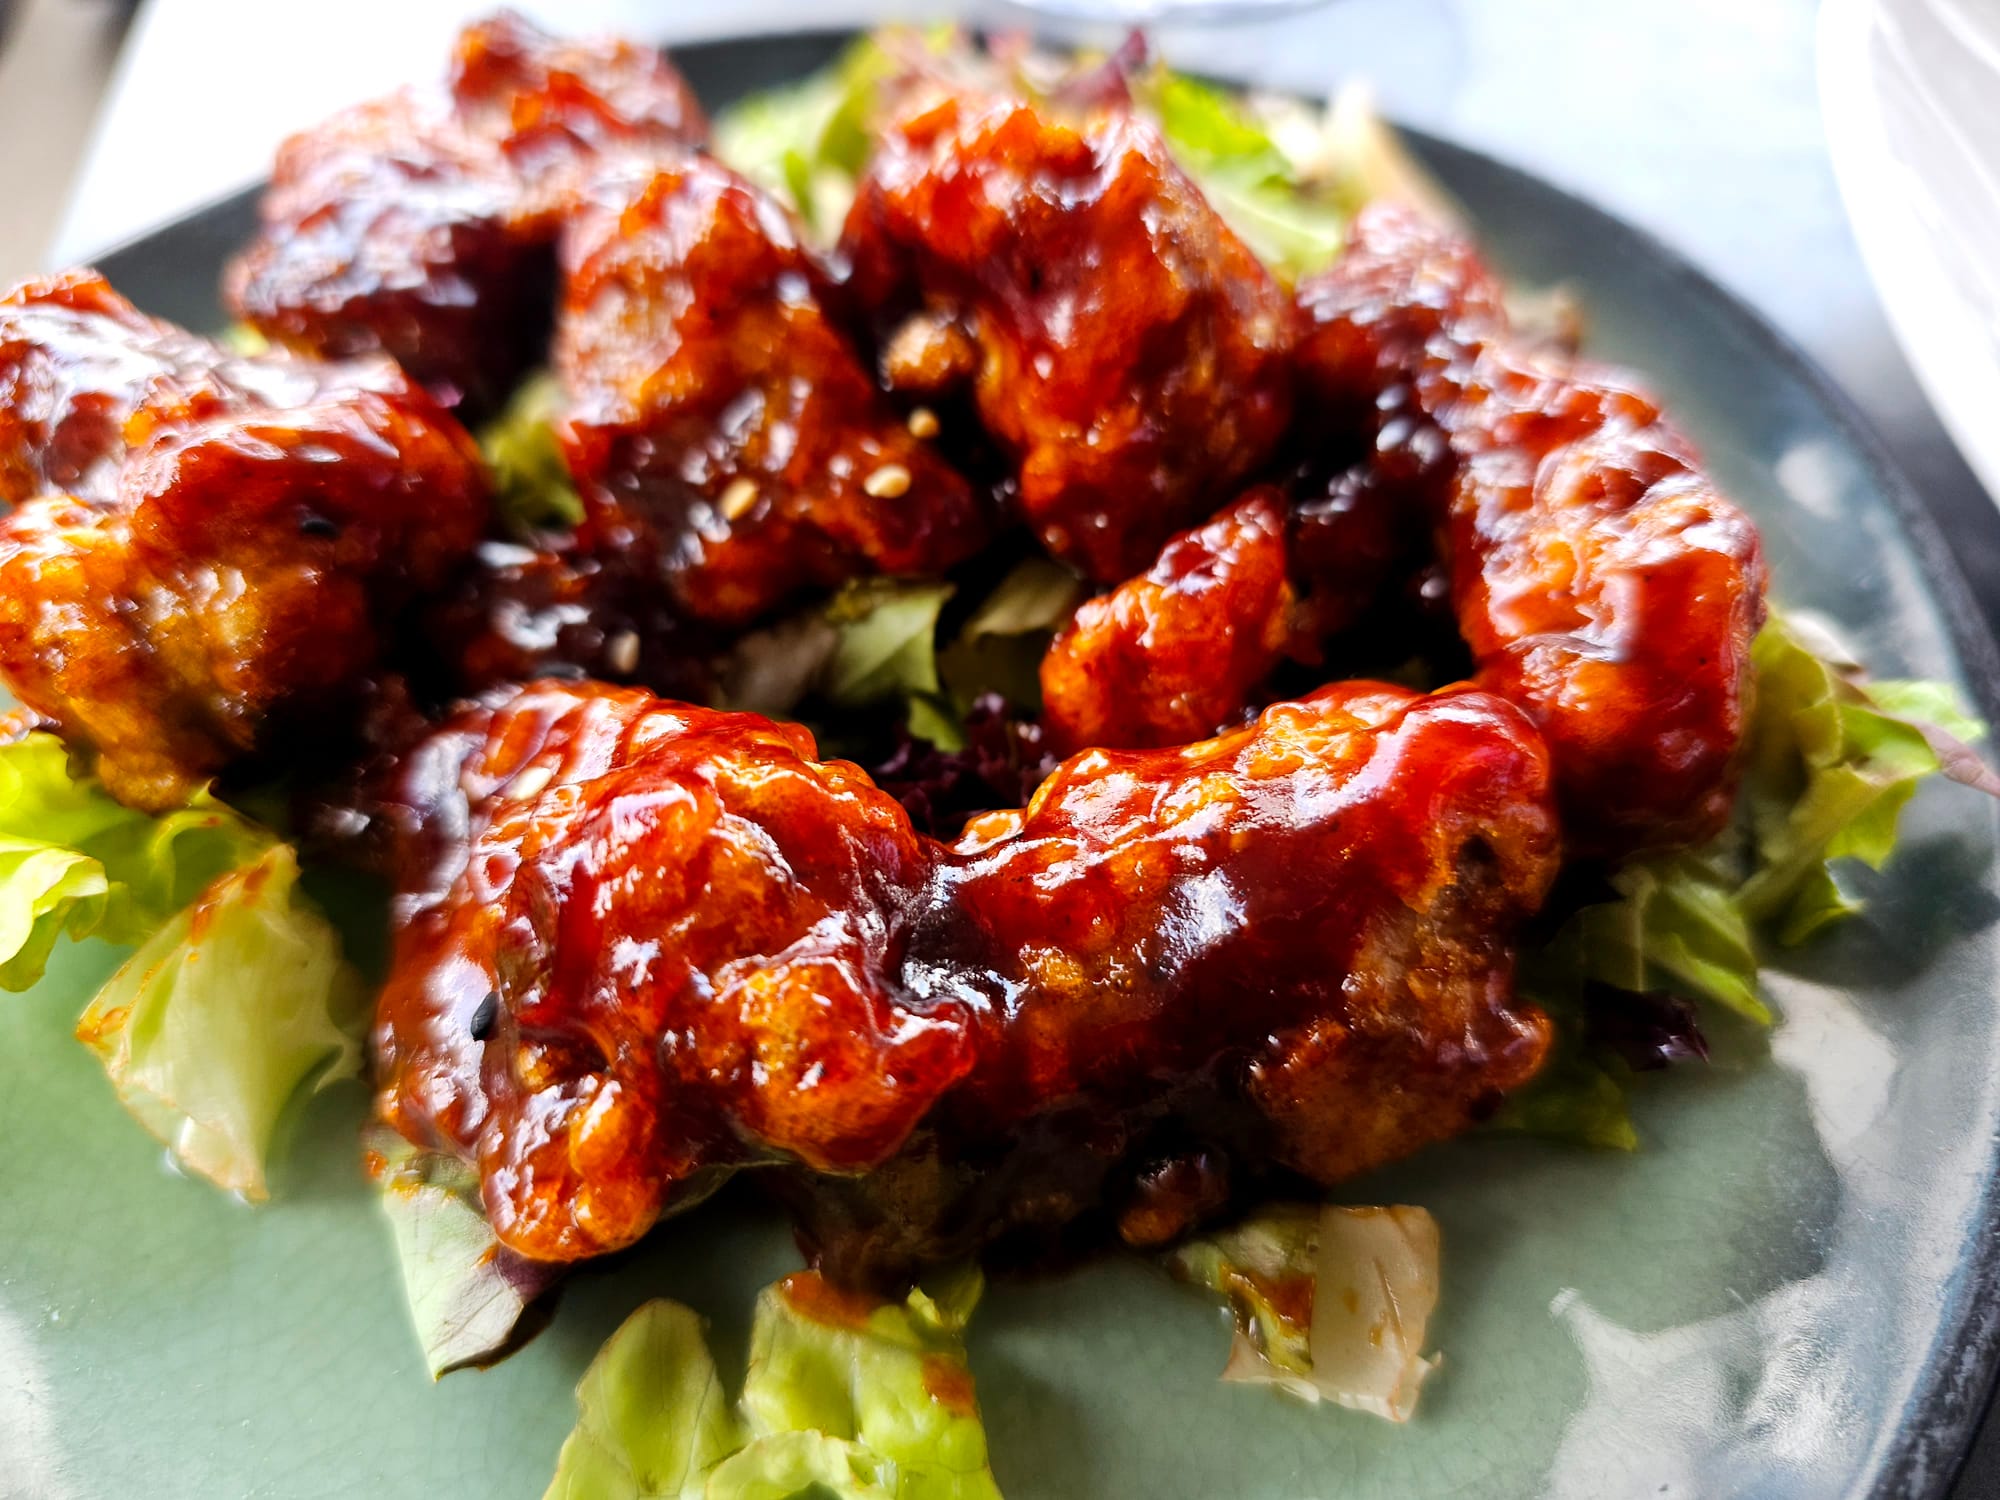 Glazed Iberico ribs on a bed of lettuce 